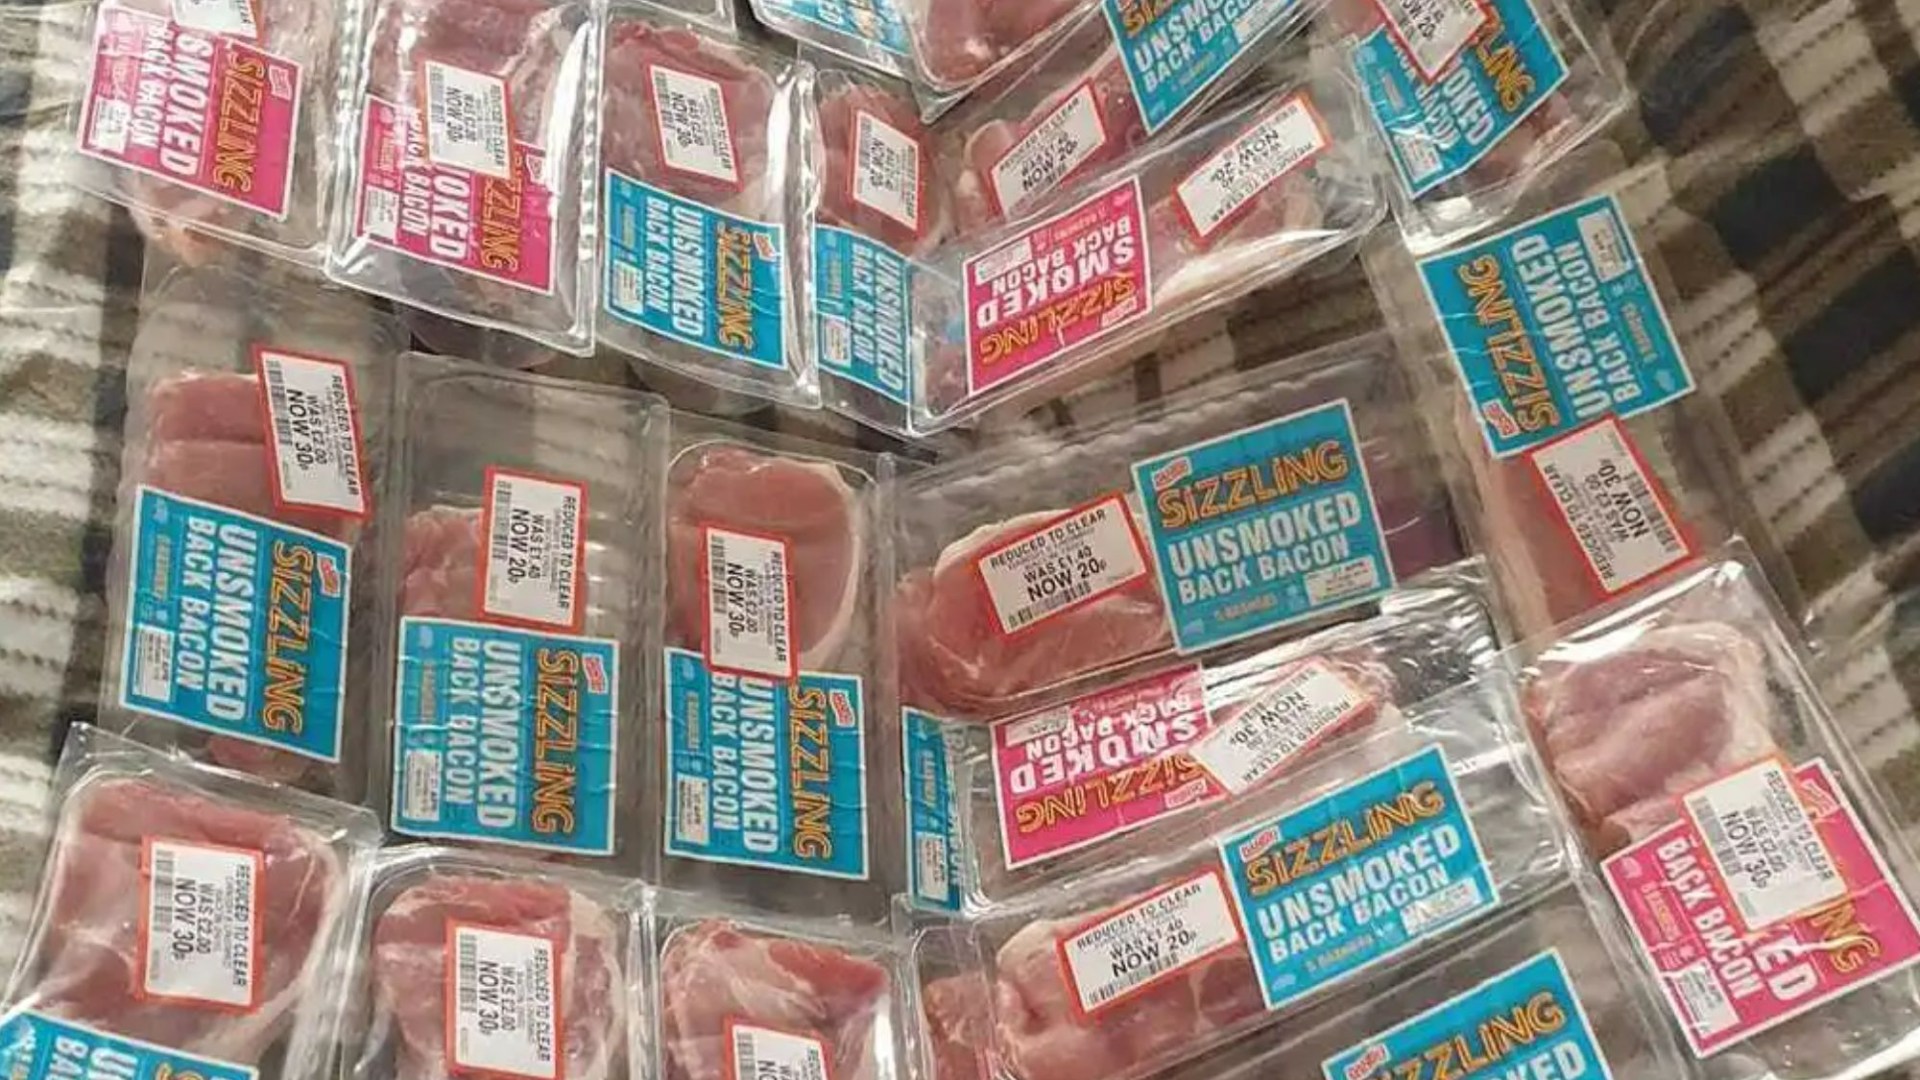 Think of others shoppers fume as woman swipes 60 packs of B&M bacon that were slashed to just 20p each [Video]